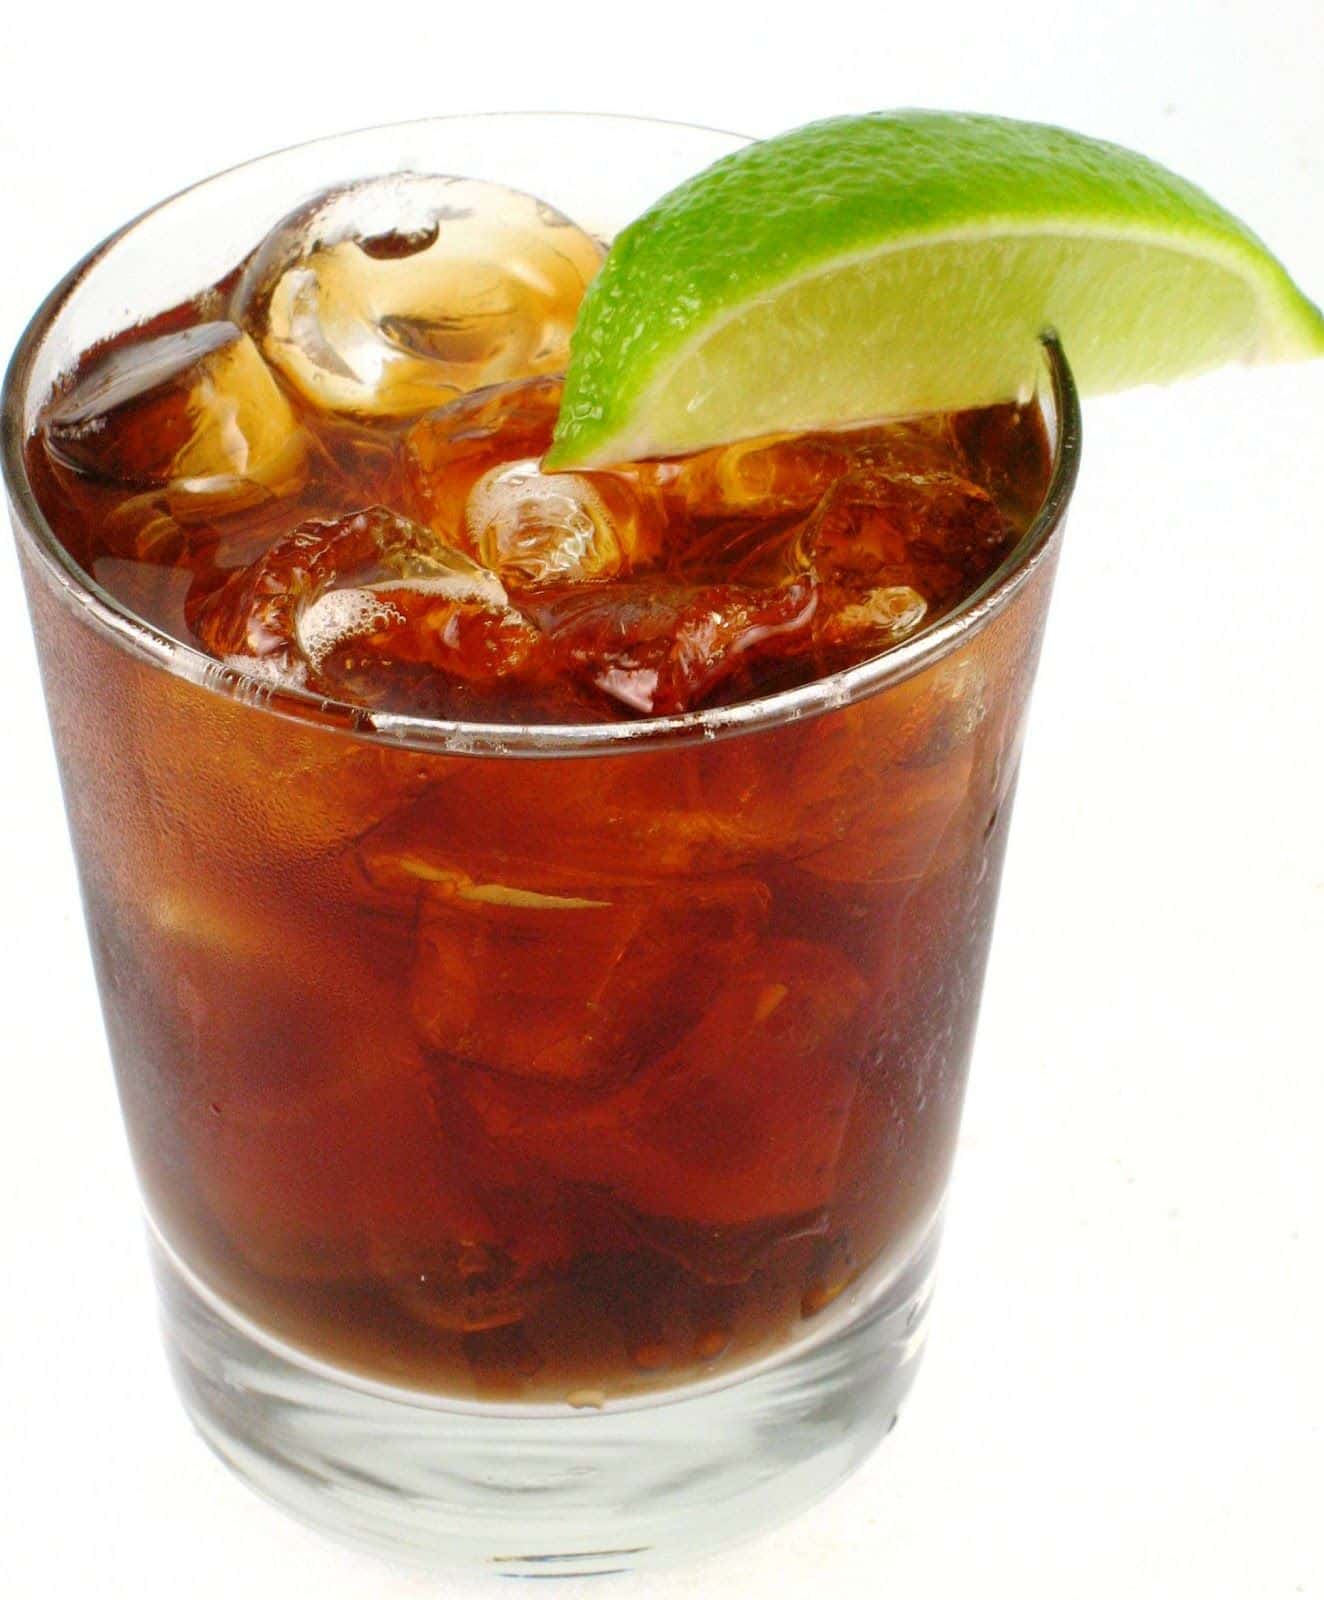 Rum and coke...simple and delicious